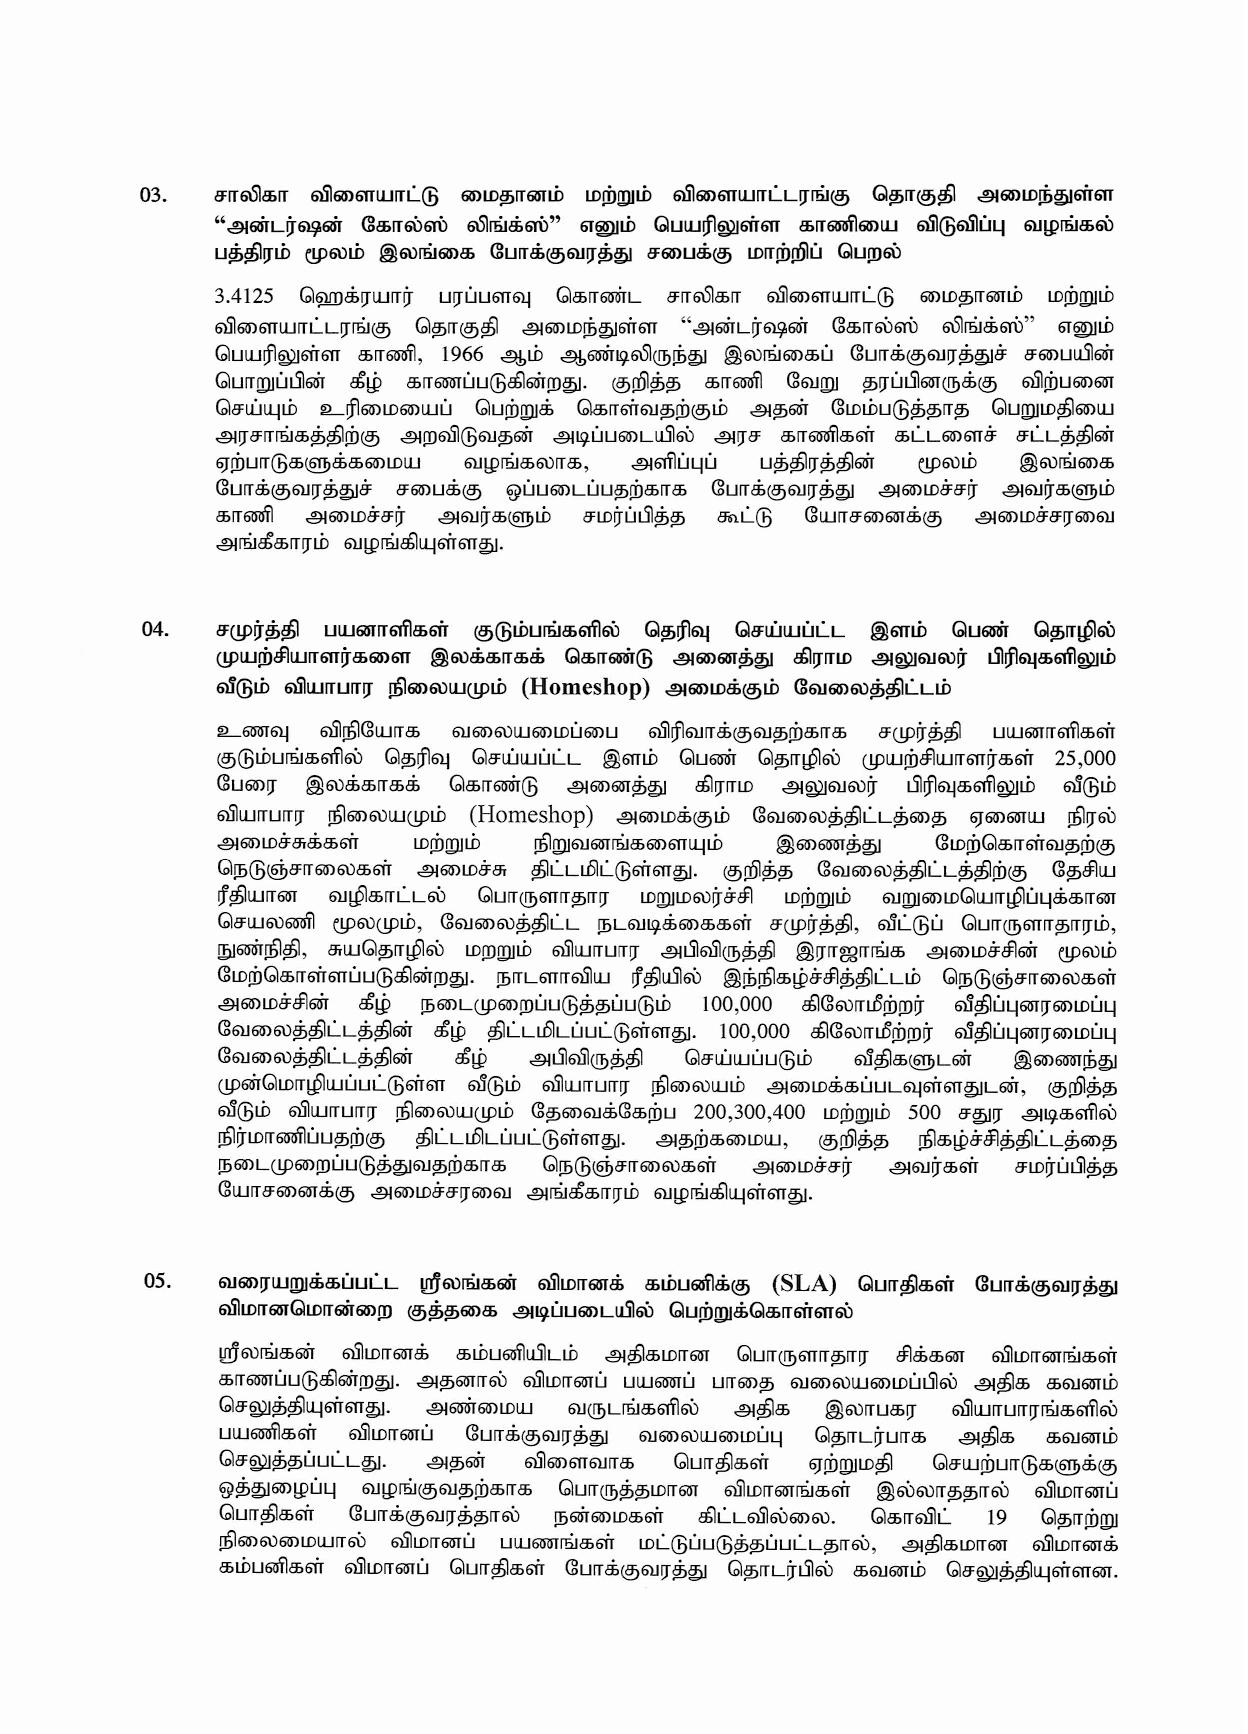 Cabinet Decision on 15.03.2021 Tamil page 002